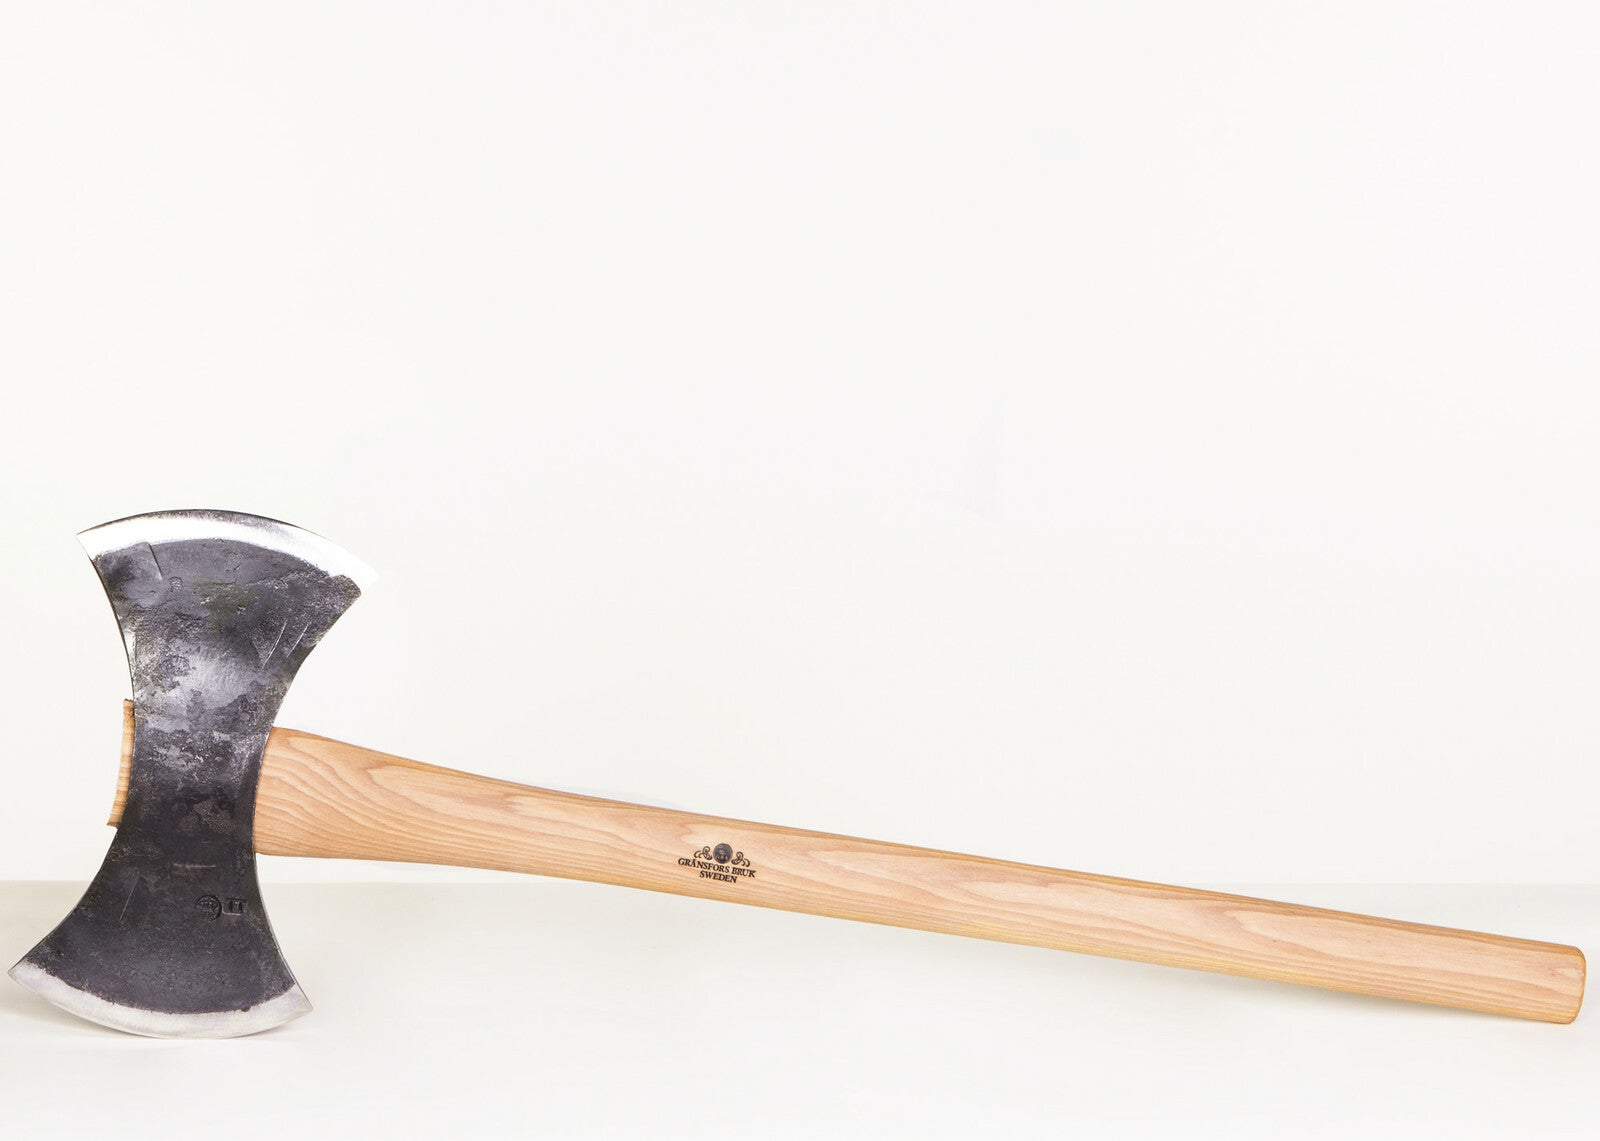 Gransfors Bruk 490-1 - Double-Bit Throwing Axe, Competition (Hickory Handle)